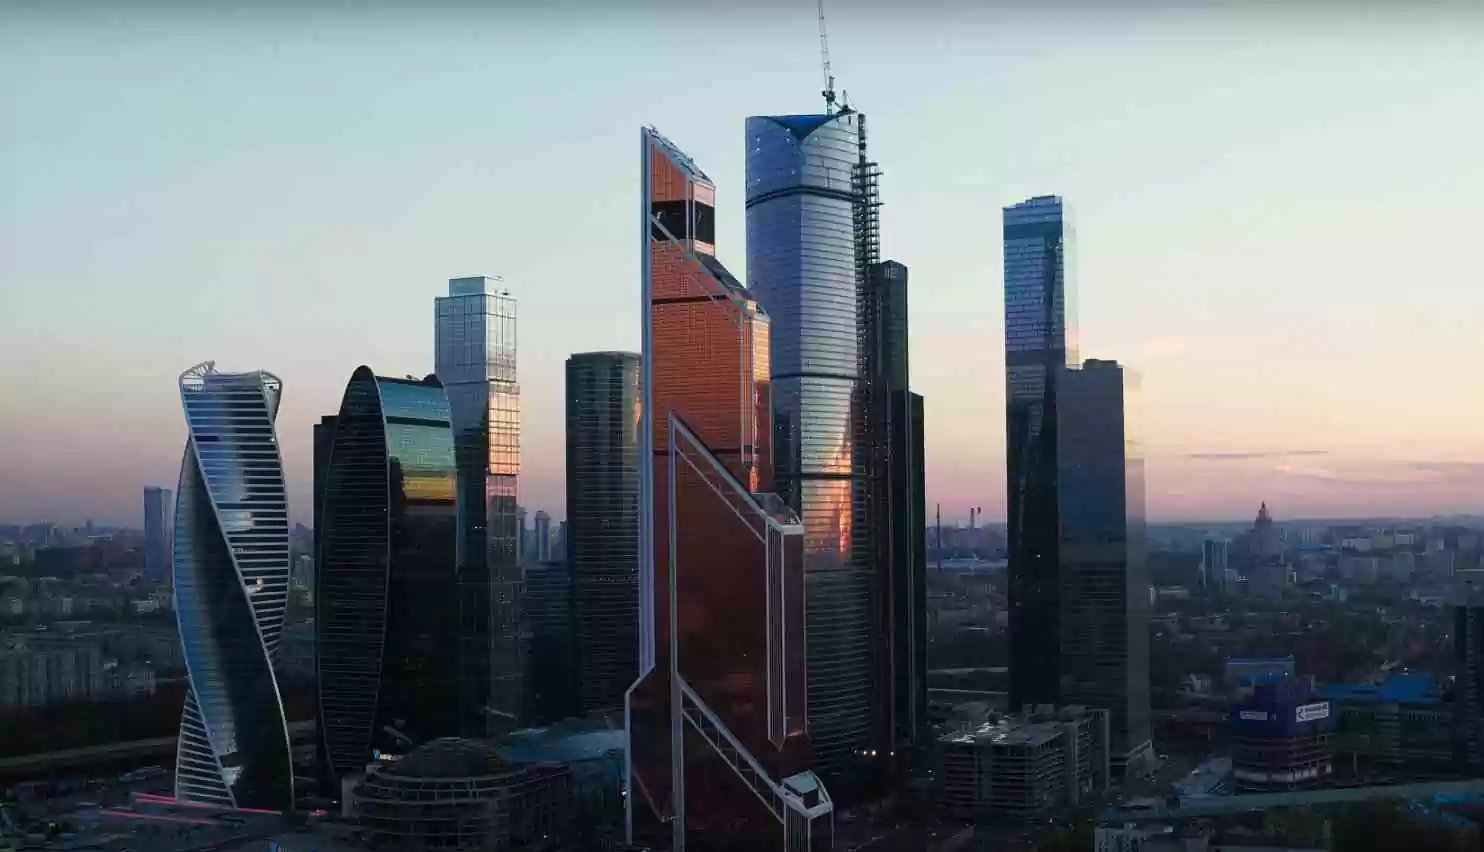 The Moscow Intenational Business Center